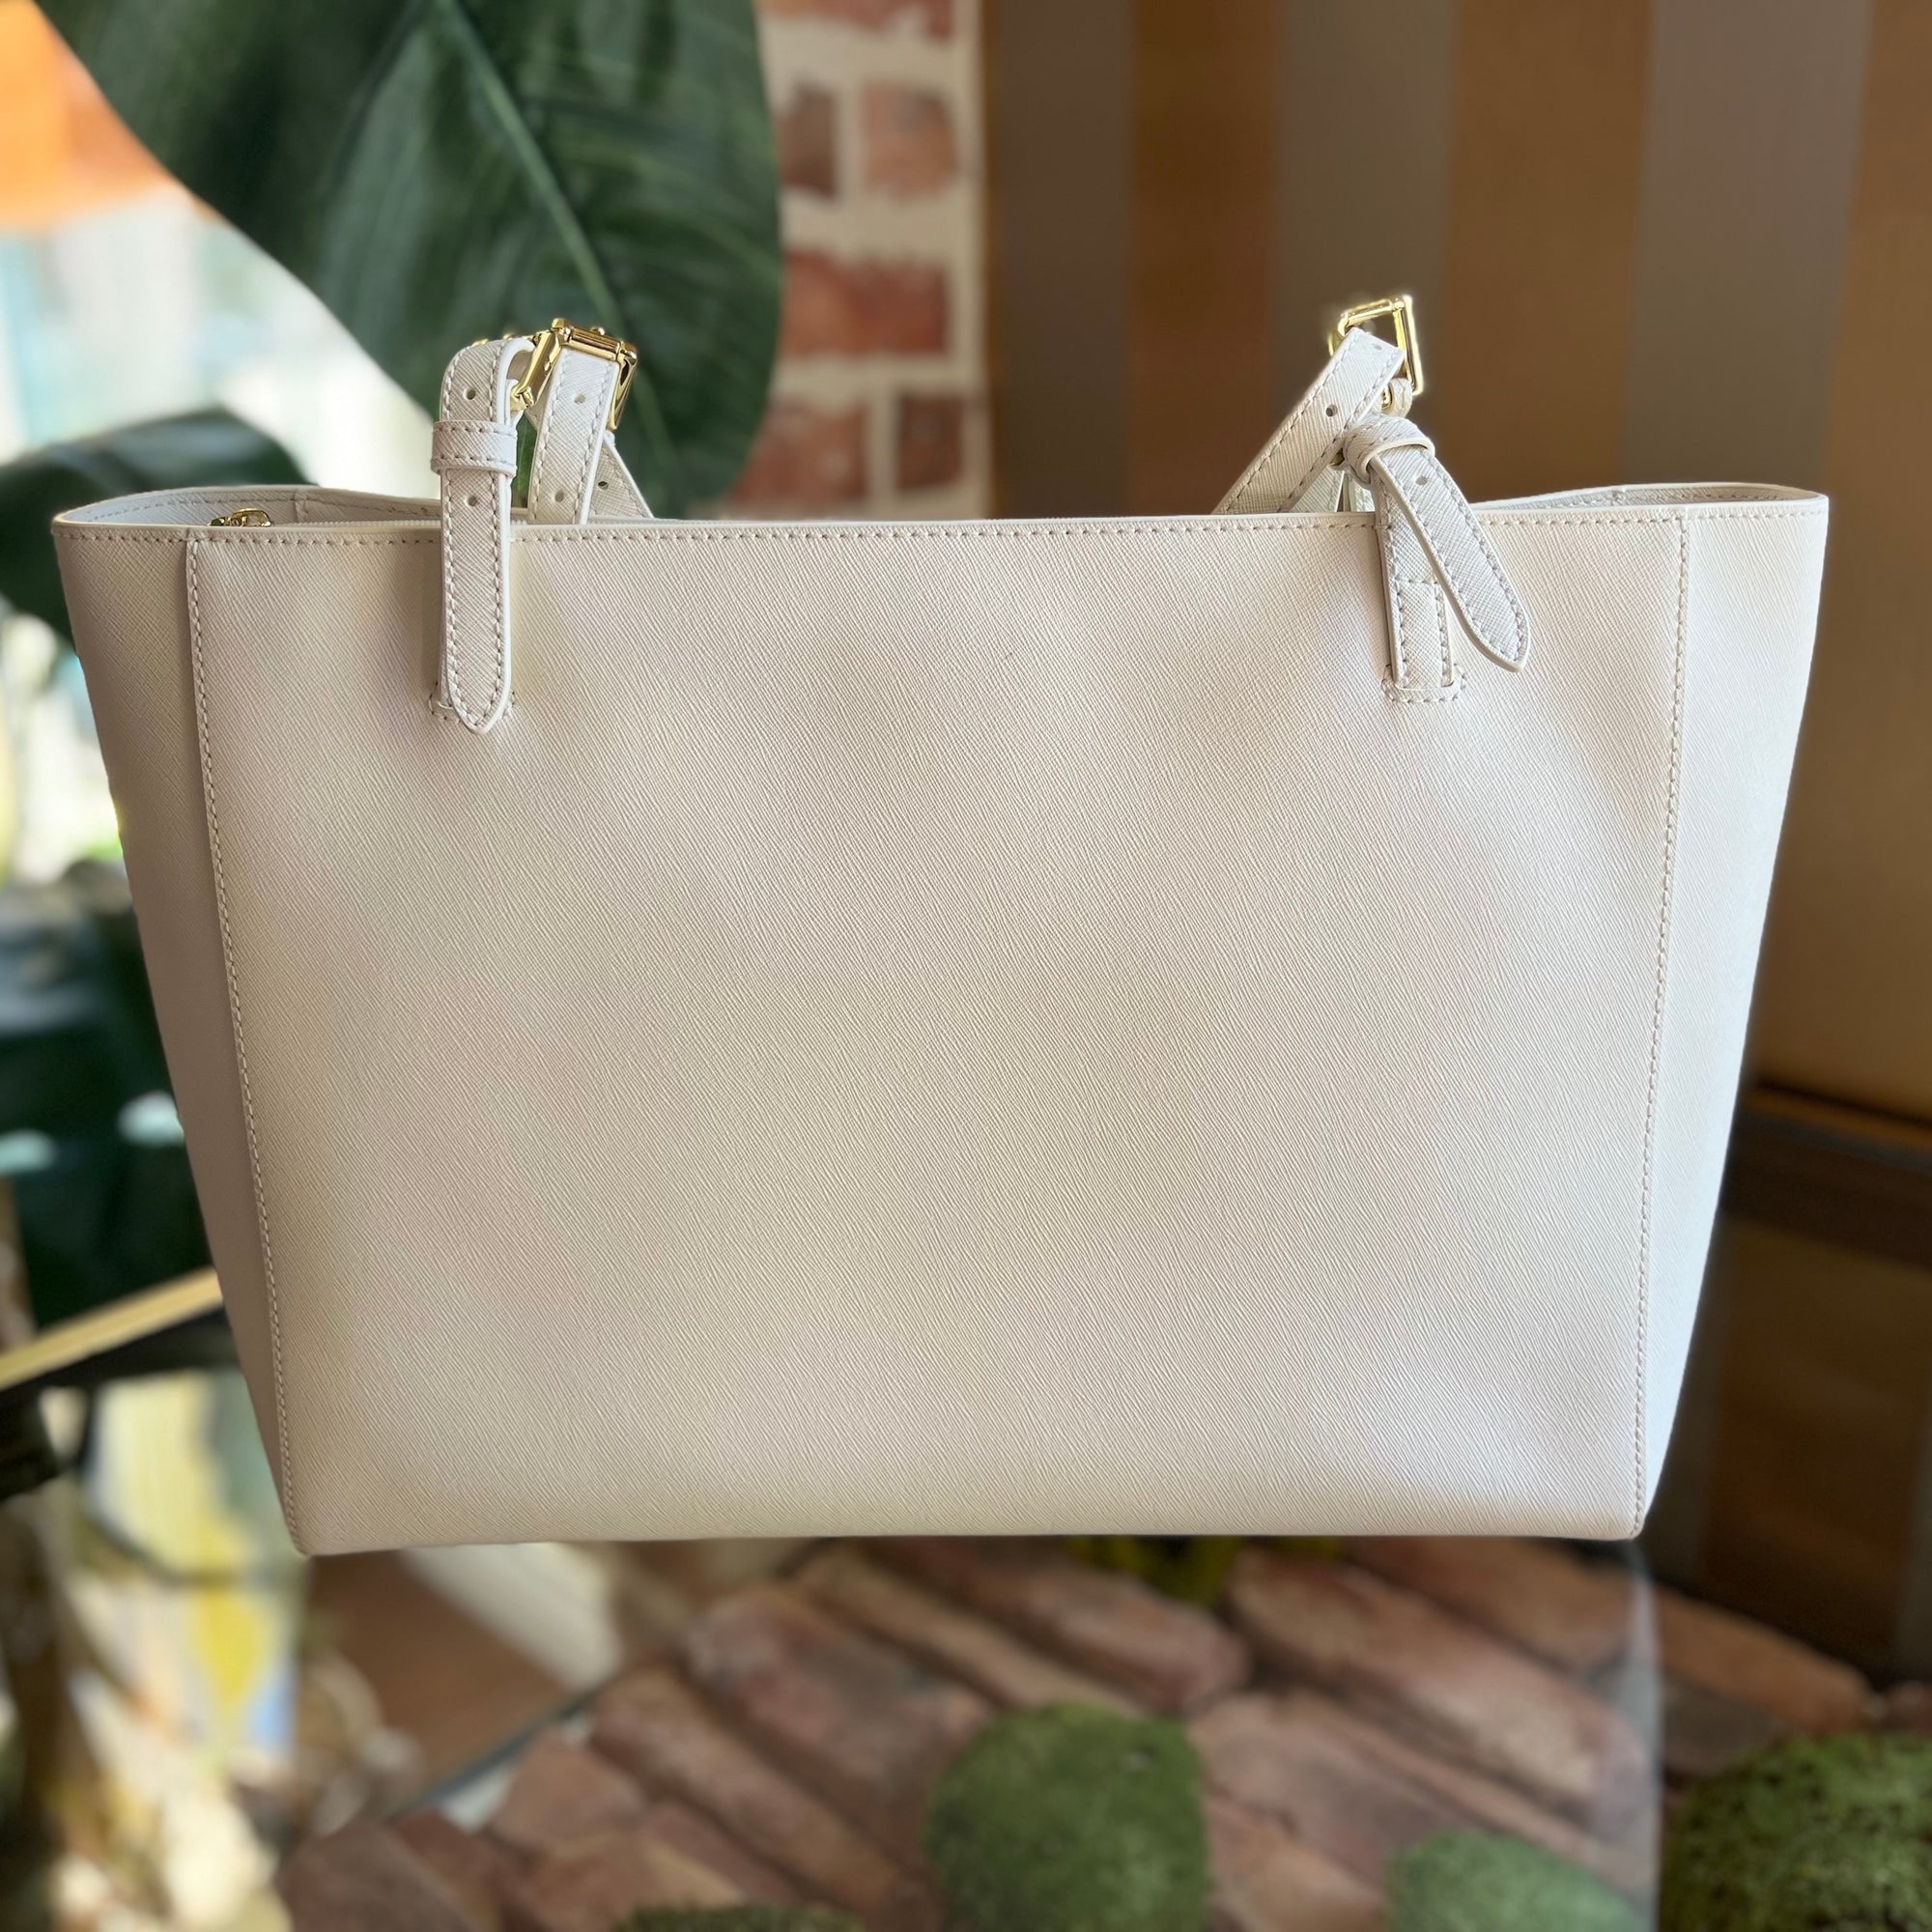 TORY BURCH White Leather tote